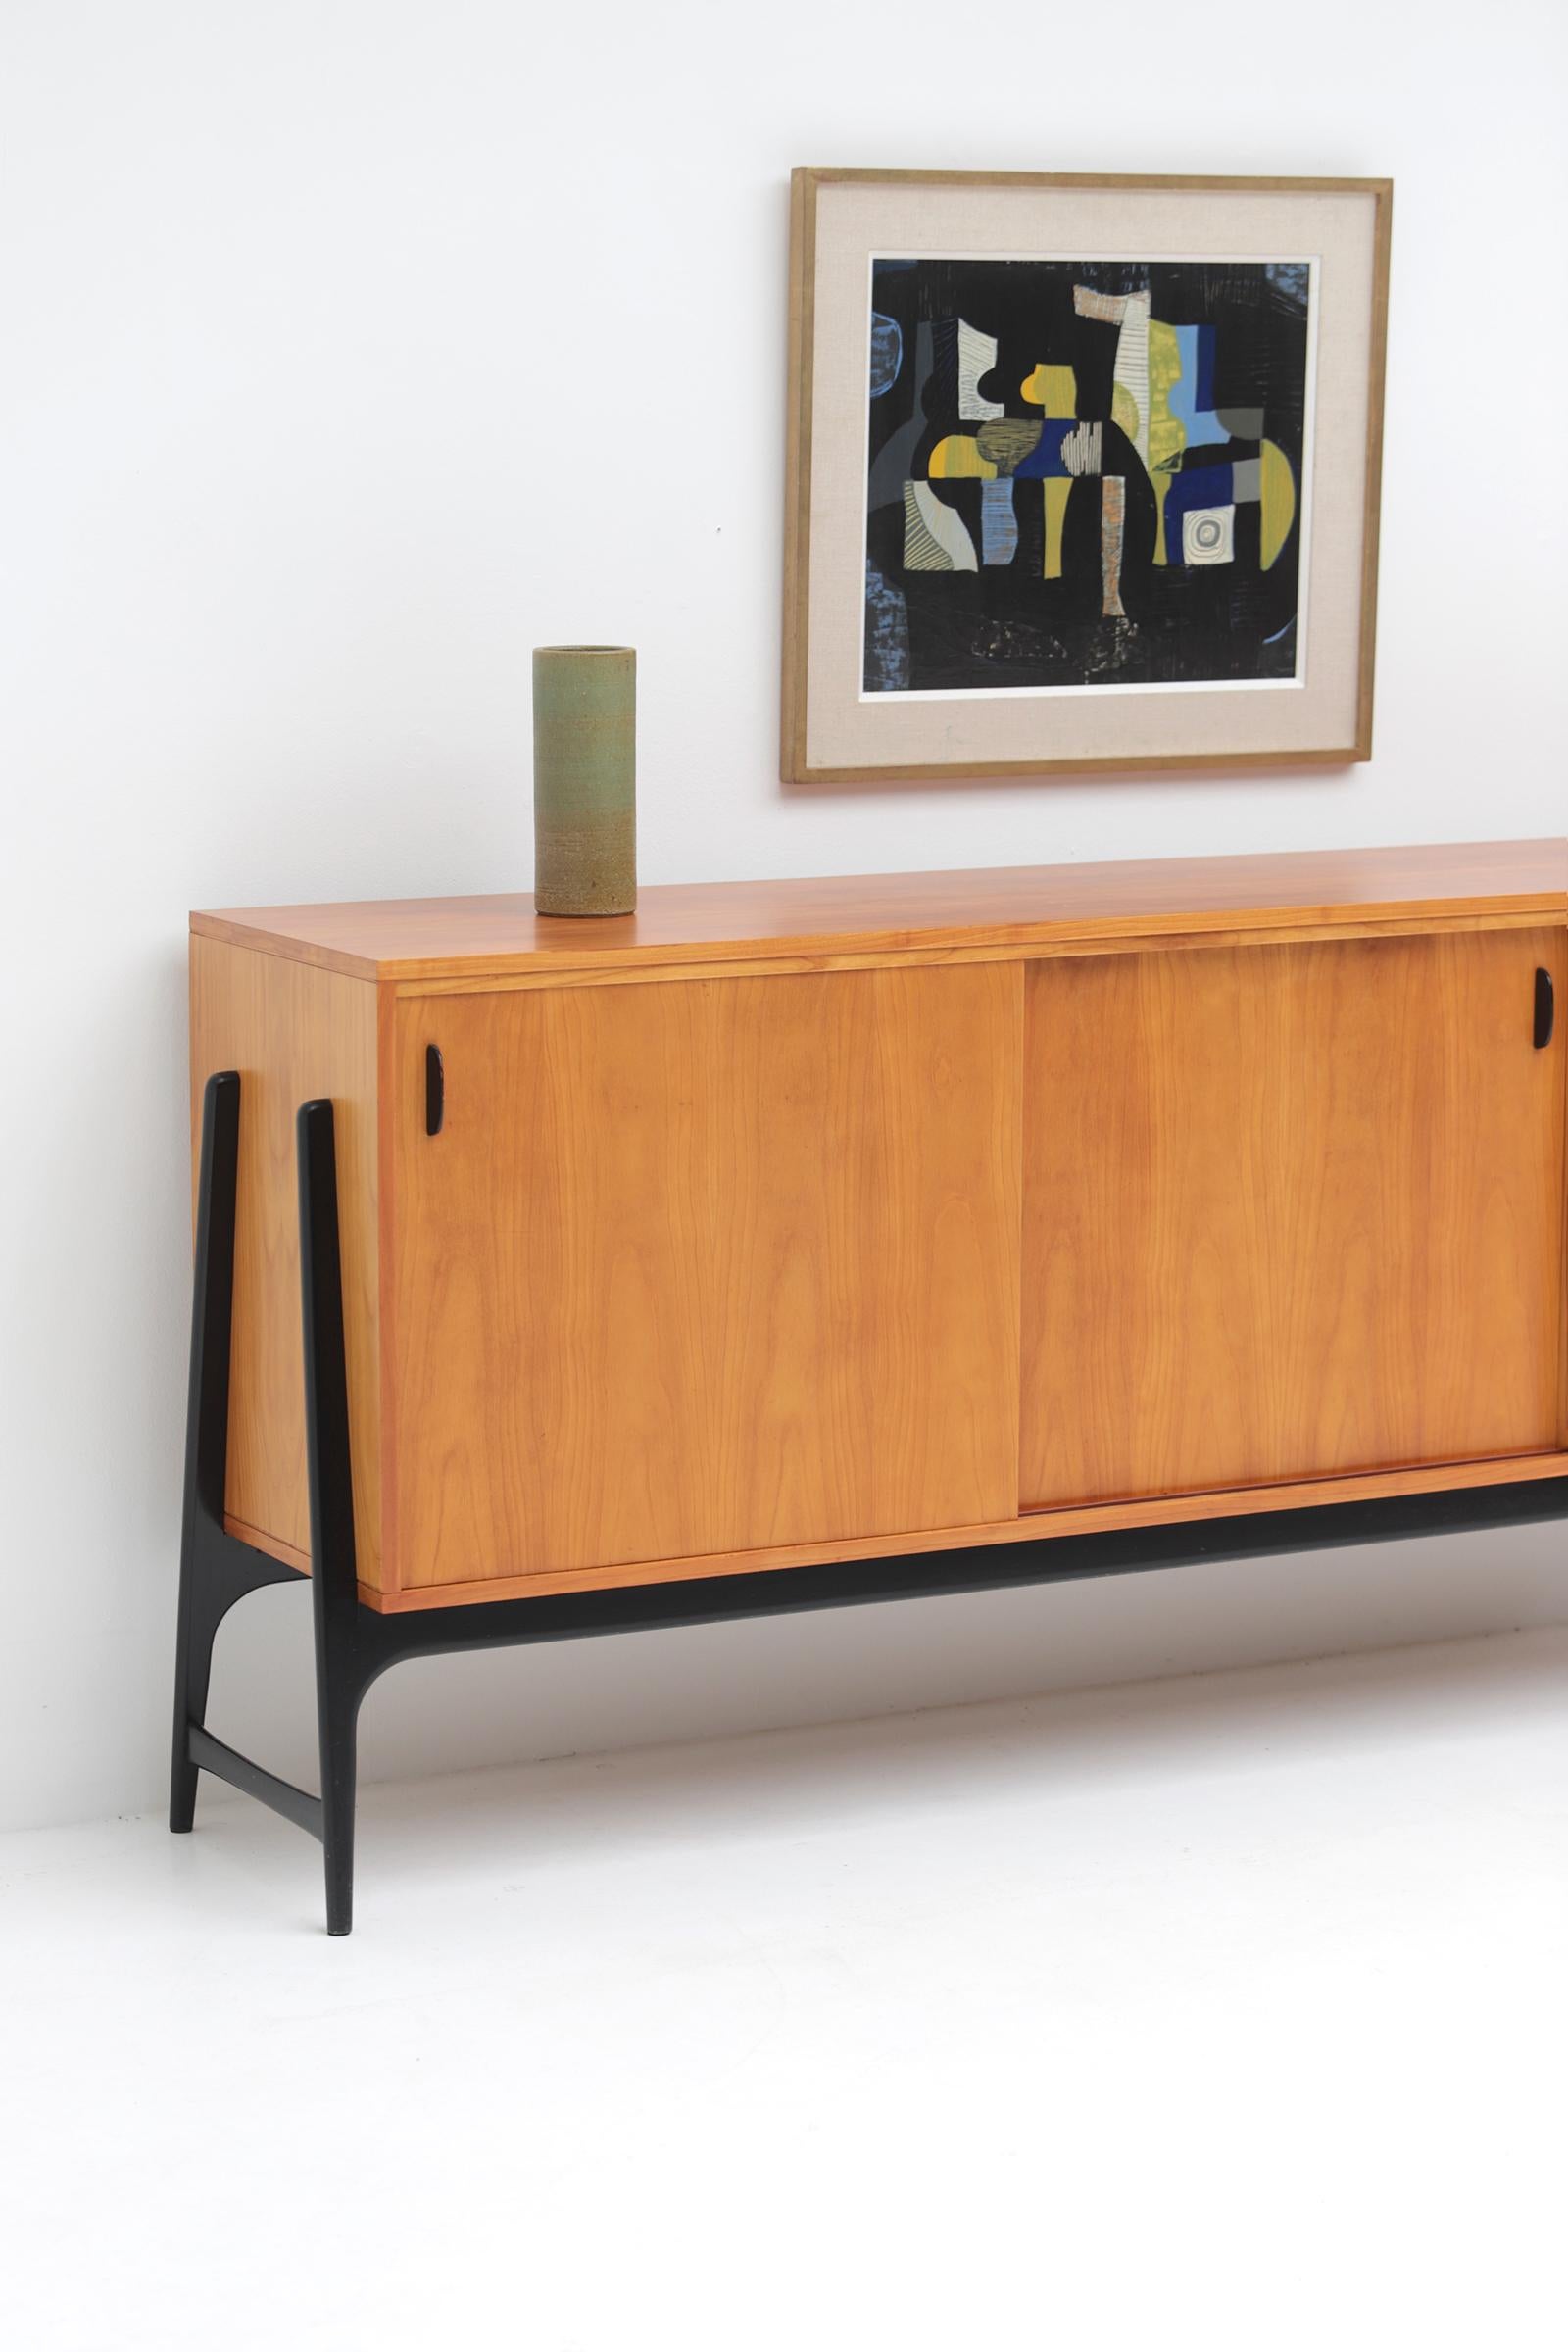 Wood Unique midcentury sideboard by Alfred Hendrickx designed in 1958 for Belform